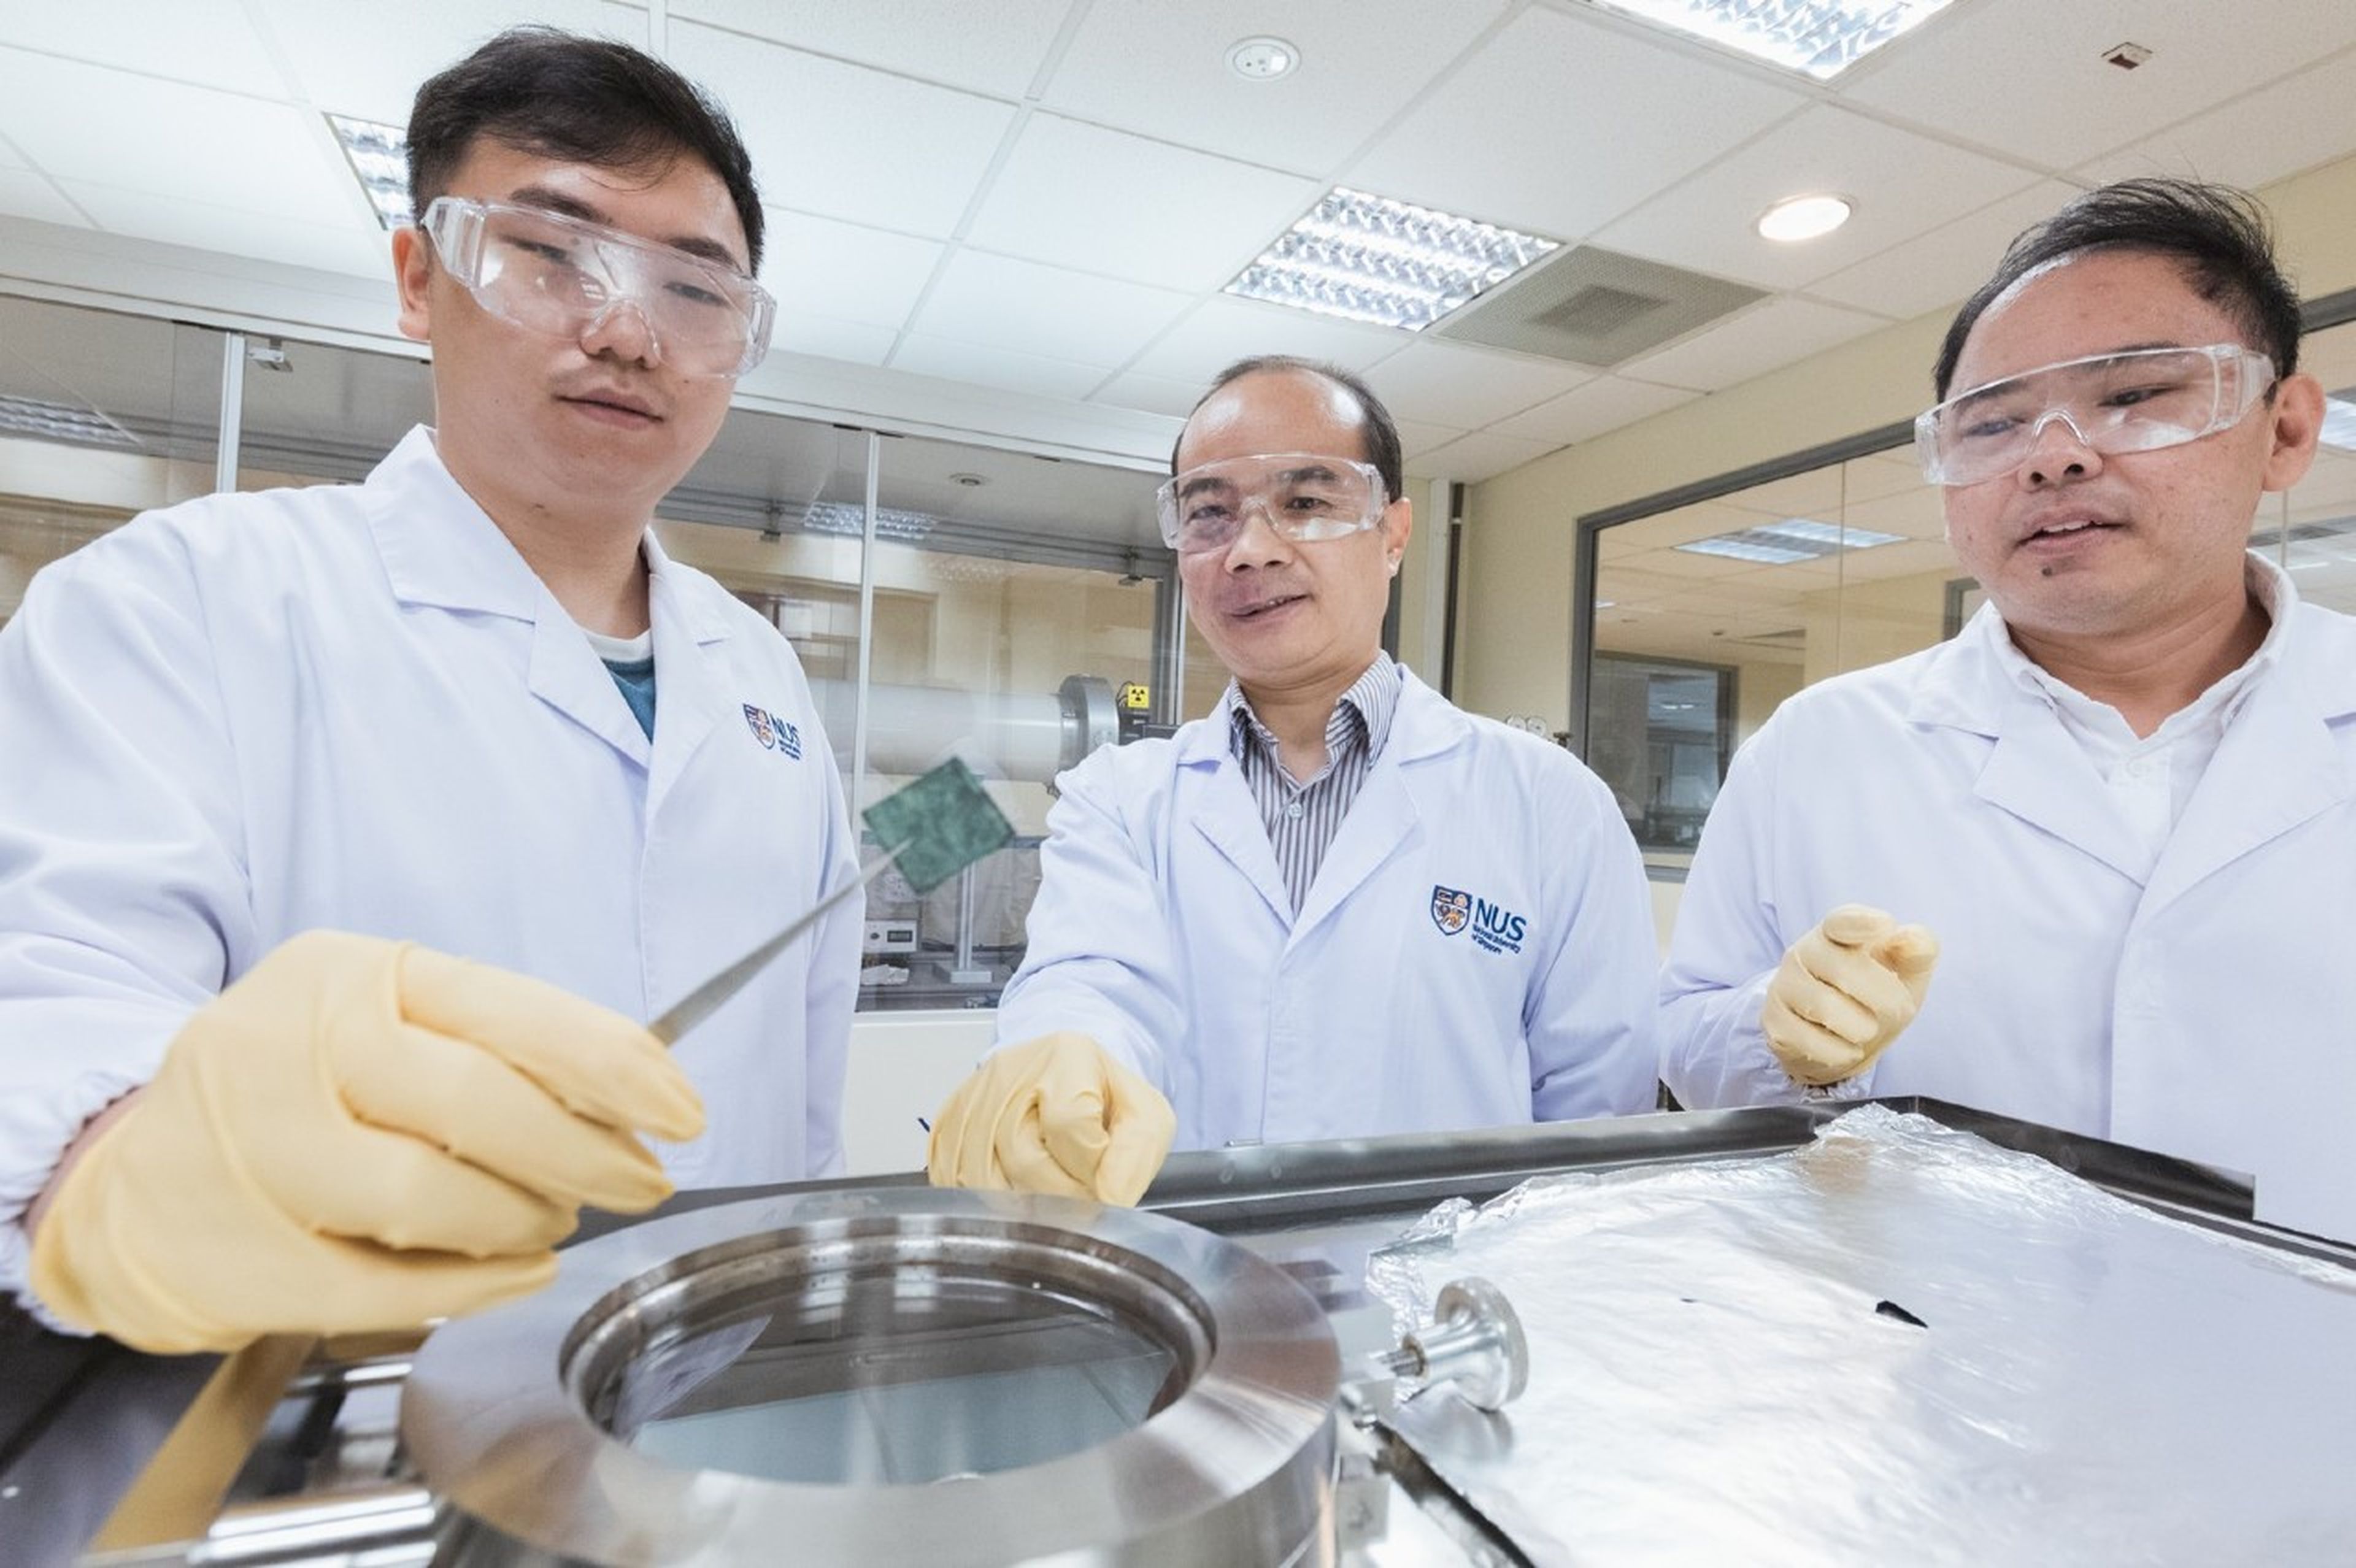 NUS researchers devise revolutionary technique to generate hydrogen more efficiently from water